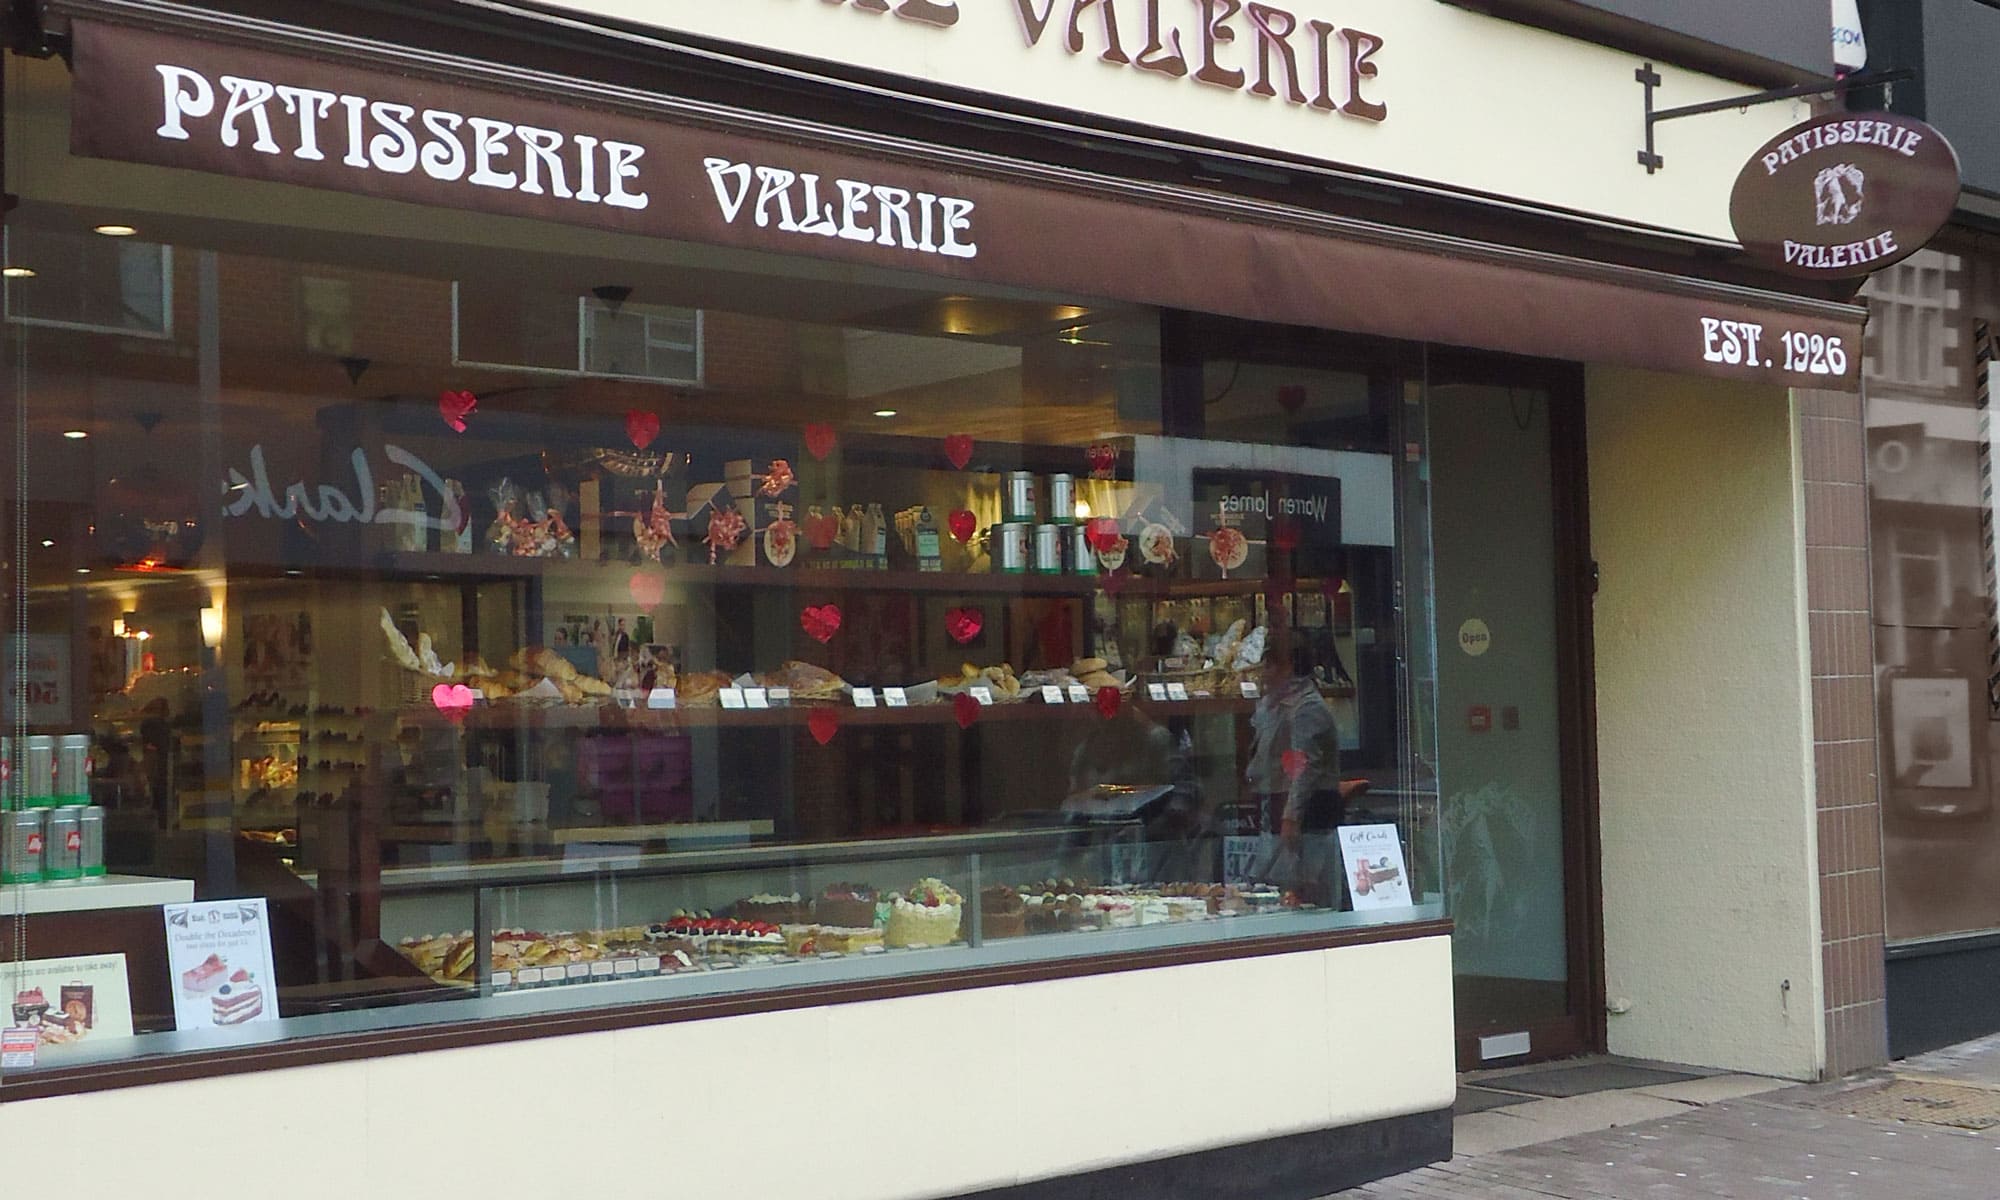 Patisserie Valerie by A P Monblat